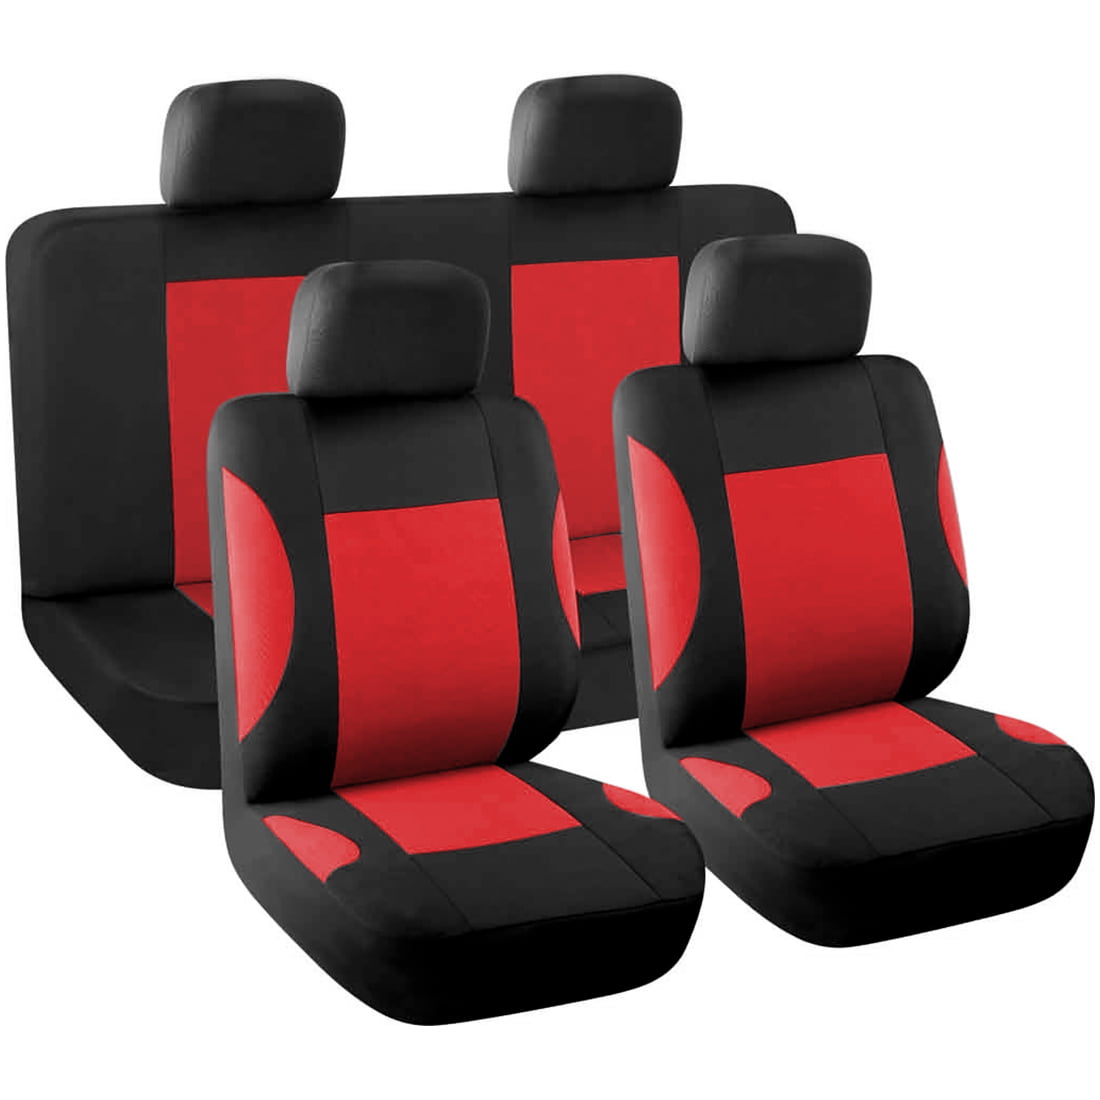 8piece Styling Interior Accessories Car Vehicle Seat Cover full set Red